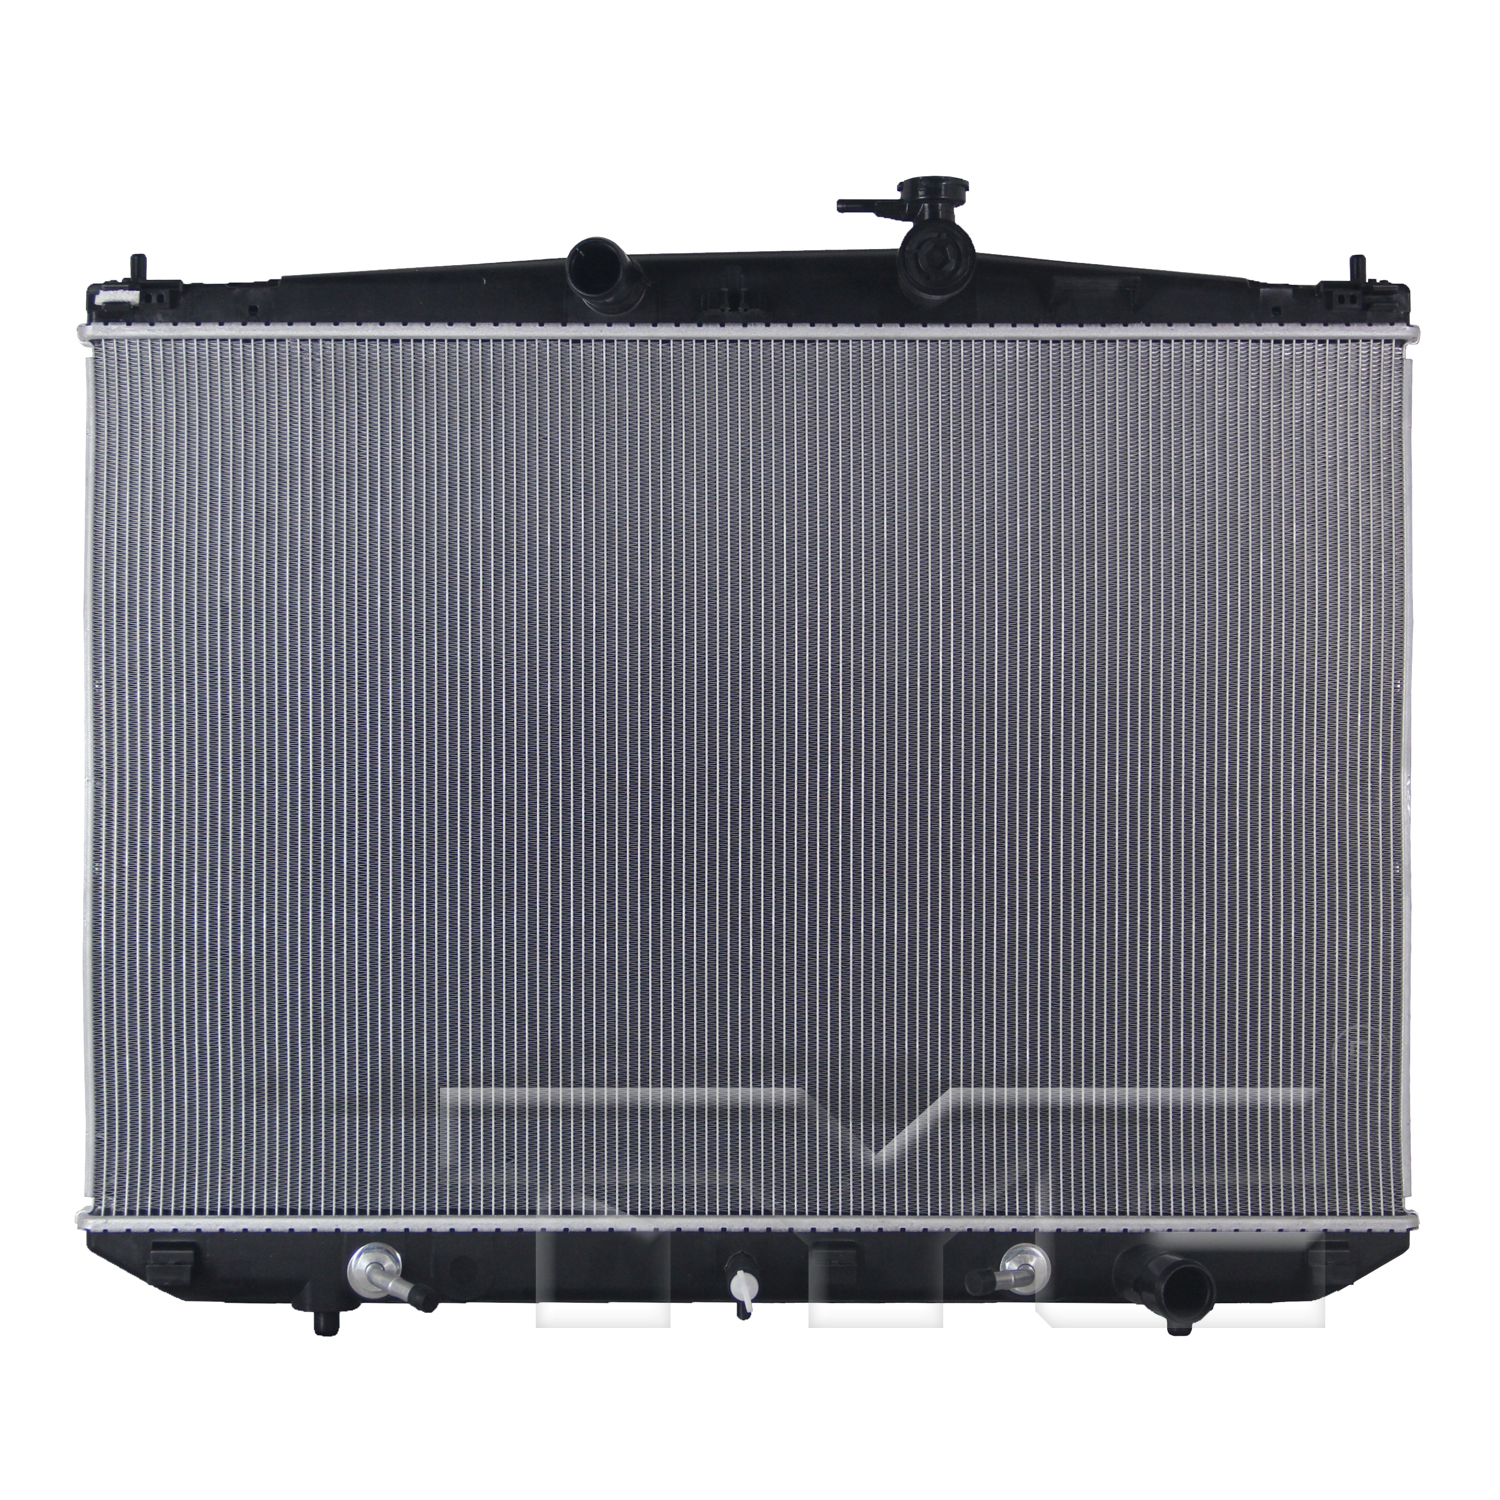 Aftermarket RADIATORS for LEXUS - RX450H, RX450h,16-18,Radiator assembly